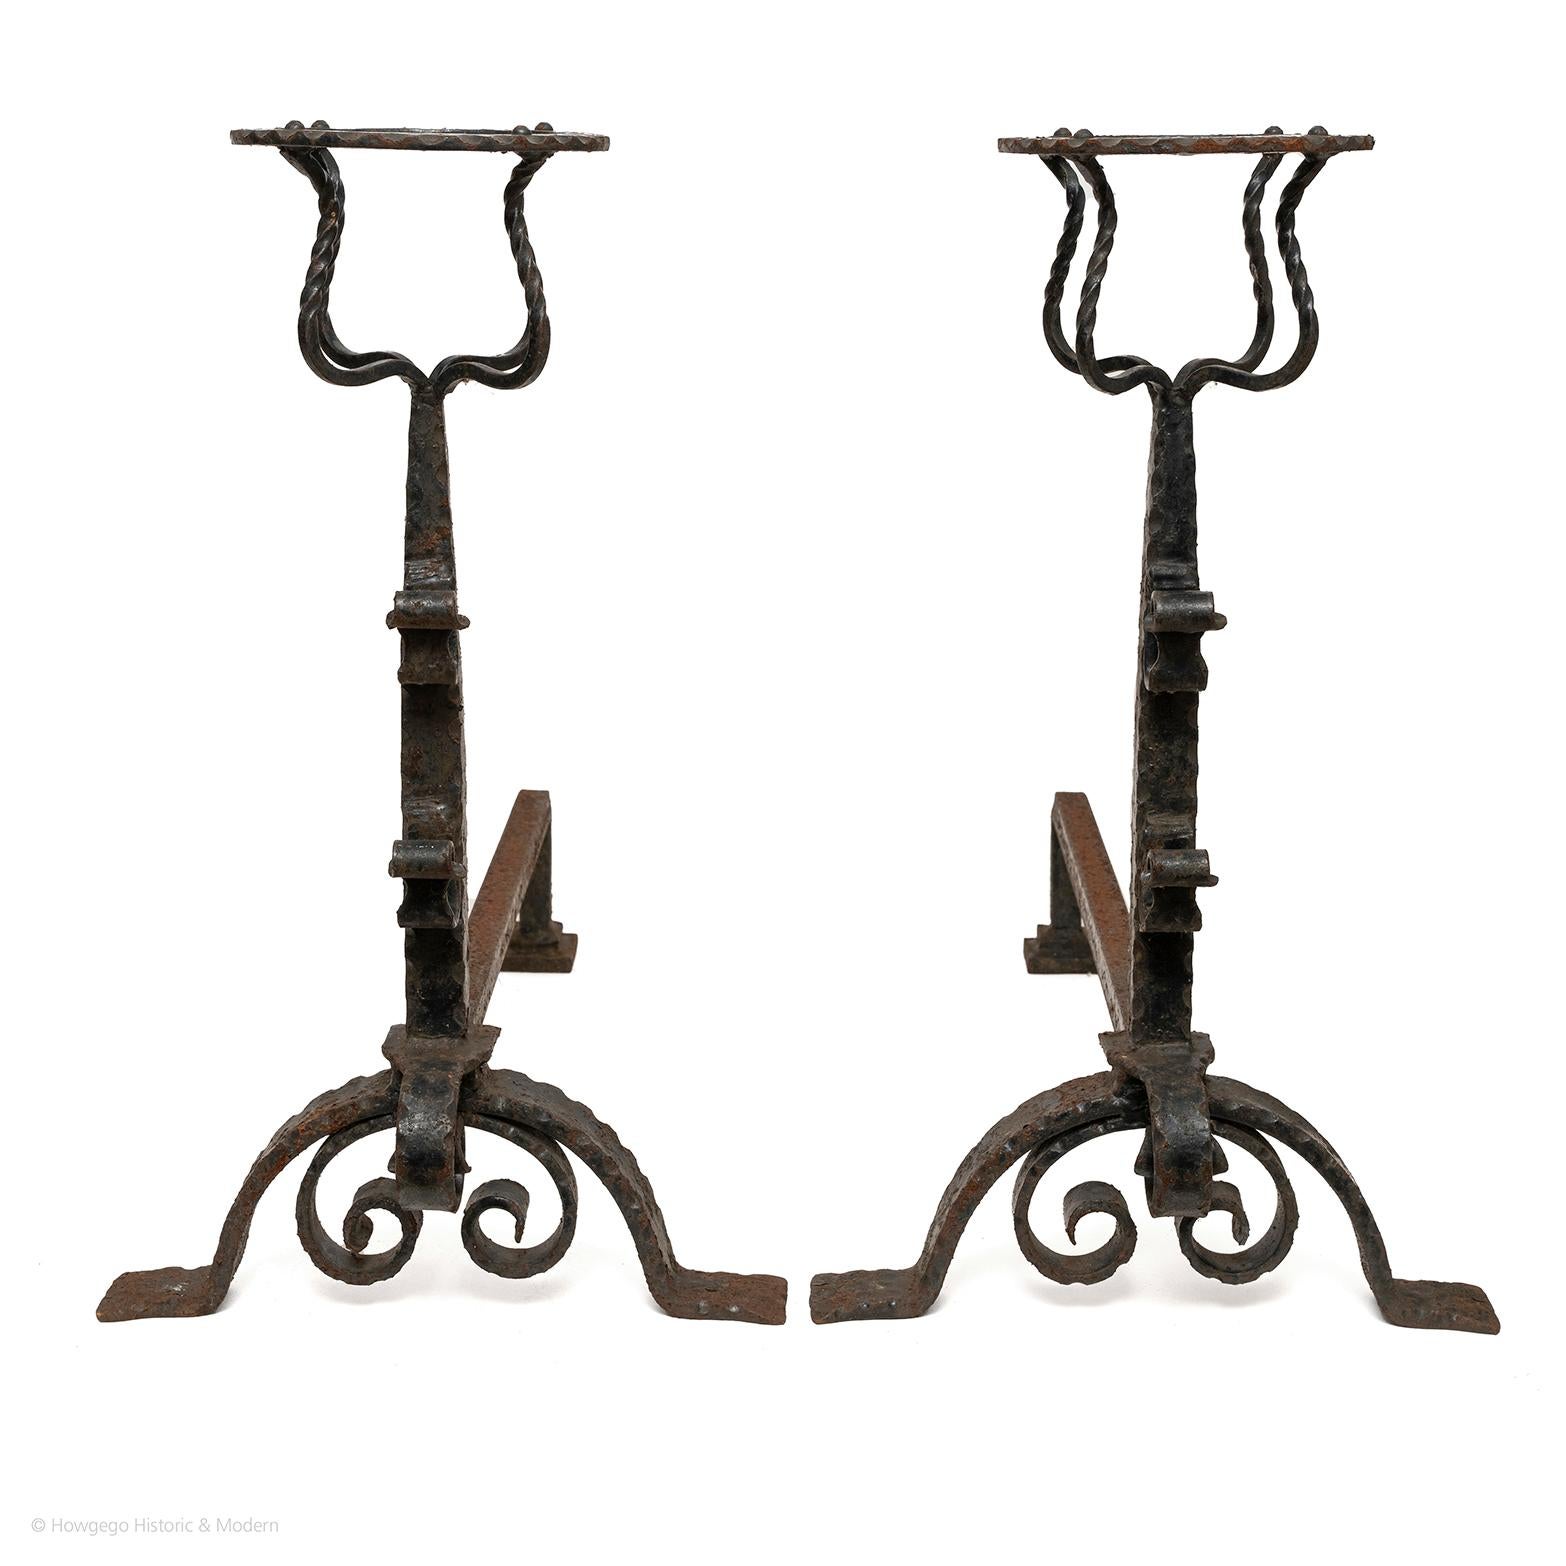 Elegant pair of Baroque wrought iron firedogs with mulling cups and spit racks for keeping food and liquids warm
Exhibit gravitas, made for a large inglenook fireplace
High quality with fine detailing - rippling, twisted and scroll work - suggesting